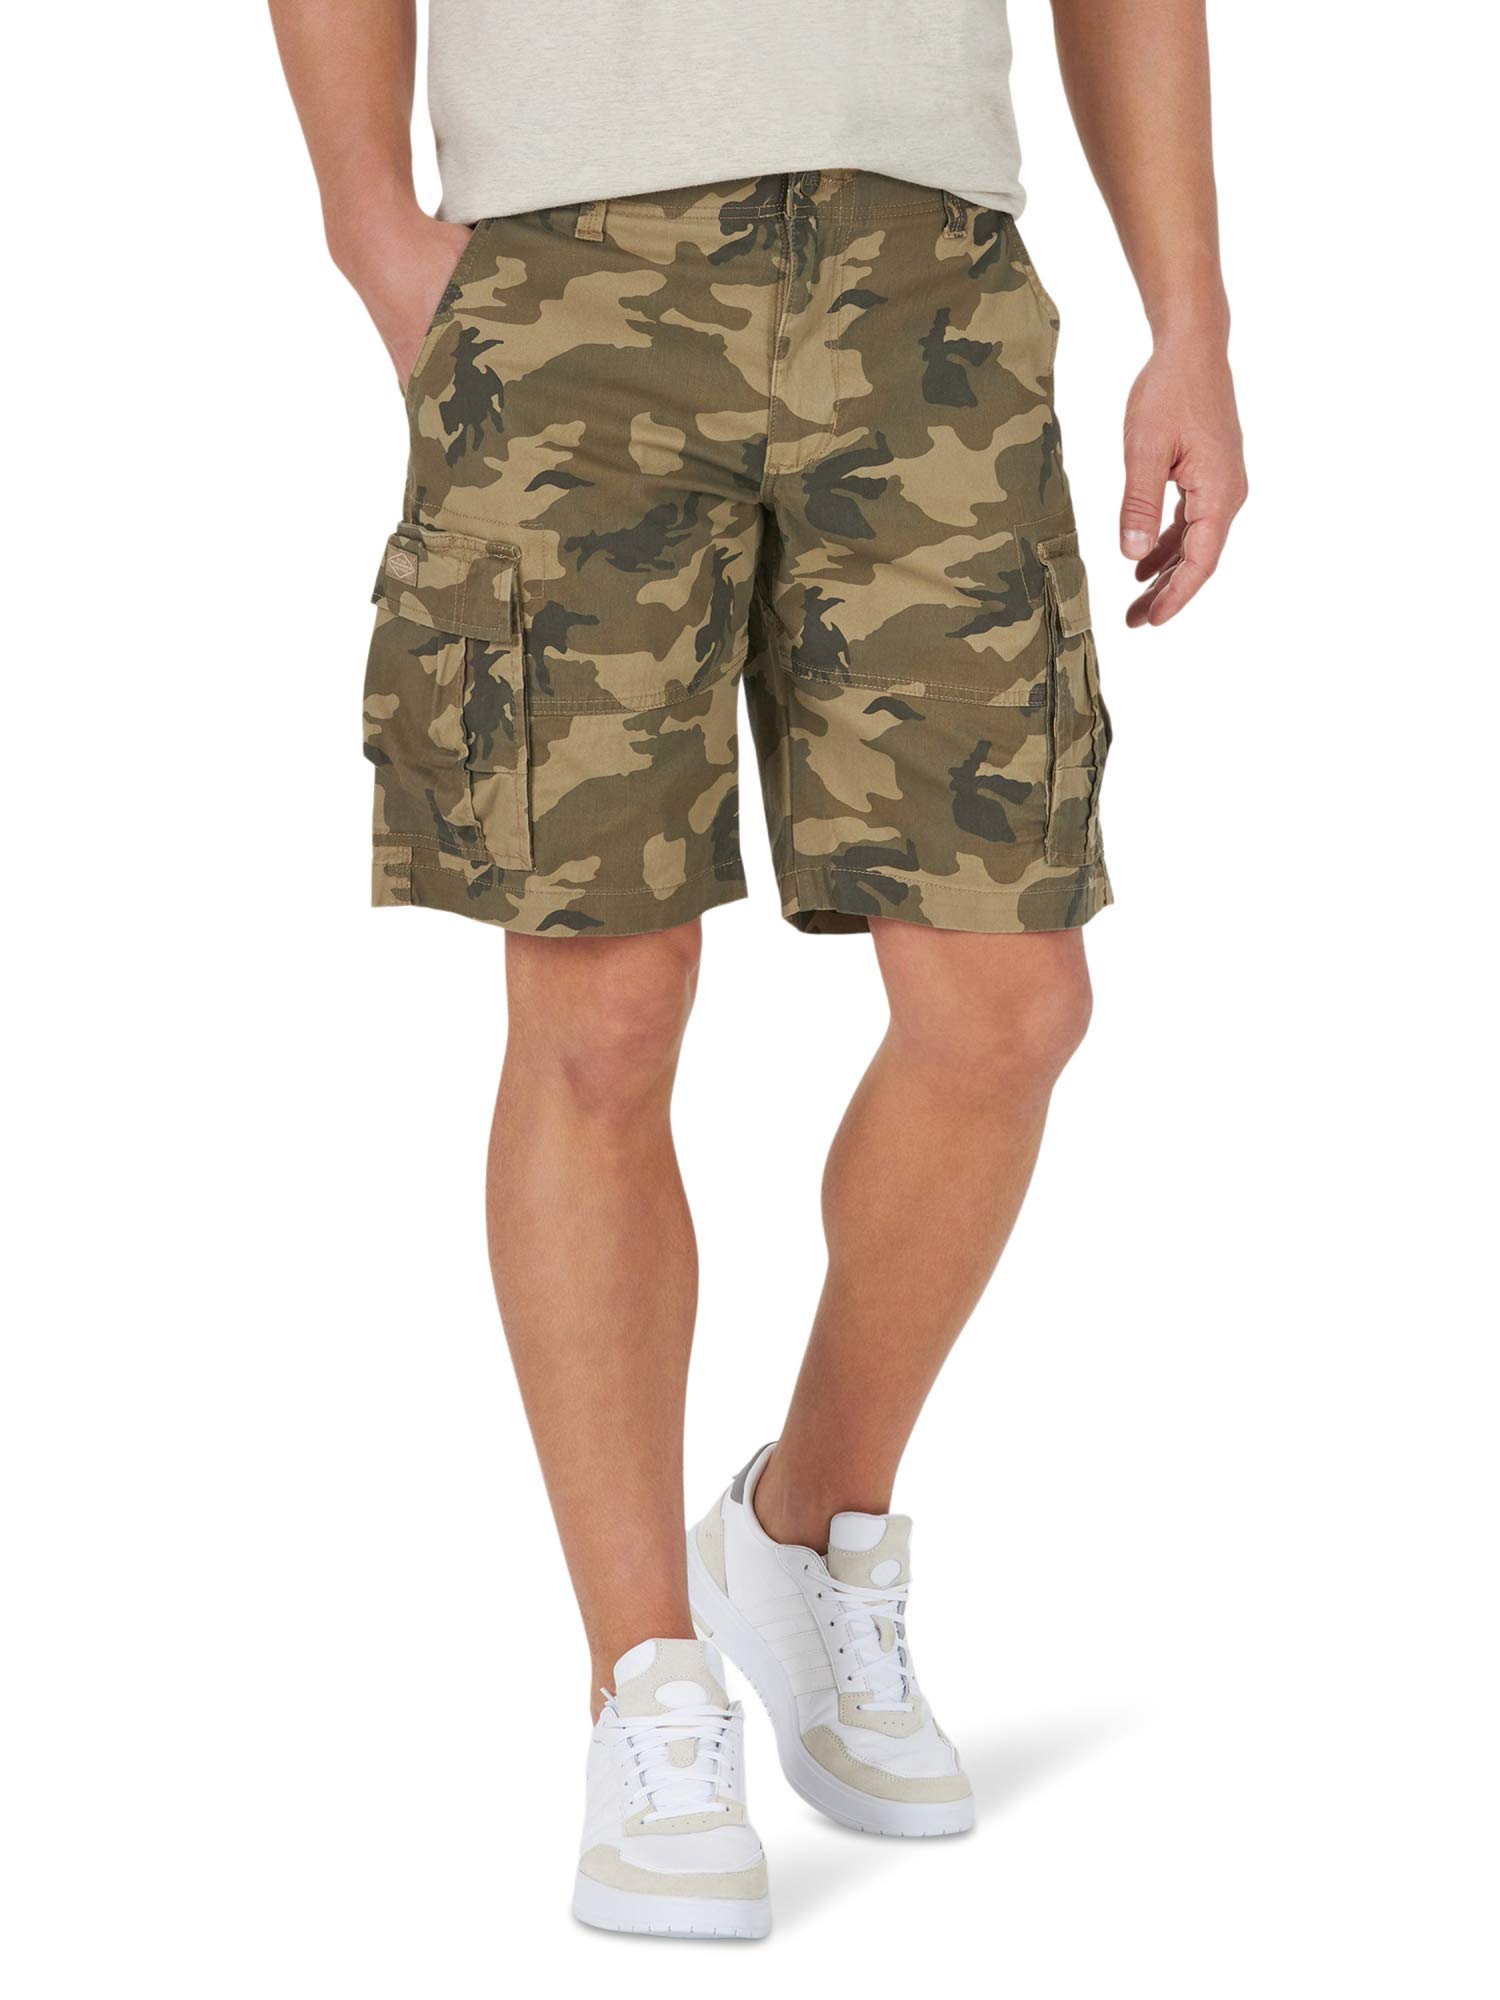 Lee Men's Extreme Motion Carolina Cargo Short (Various Colors) $15.92 + Free Shipping w/ Prime or on $35+